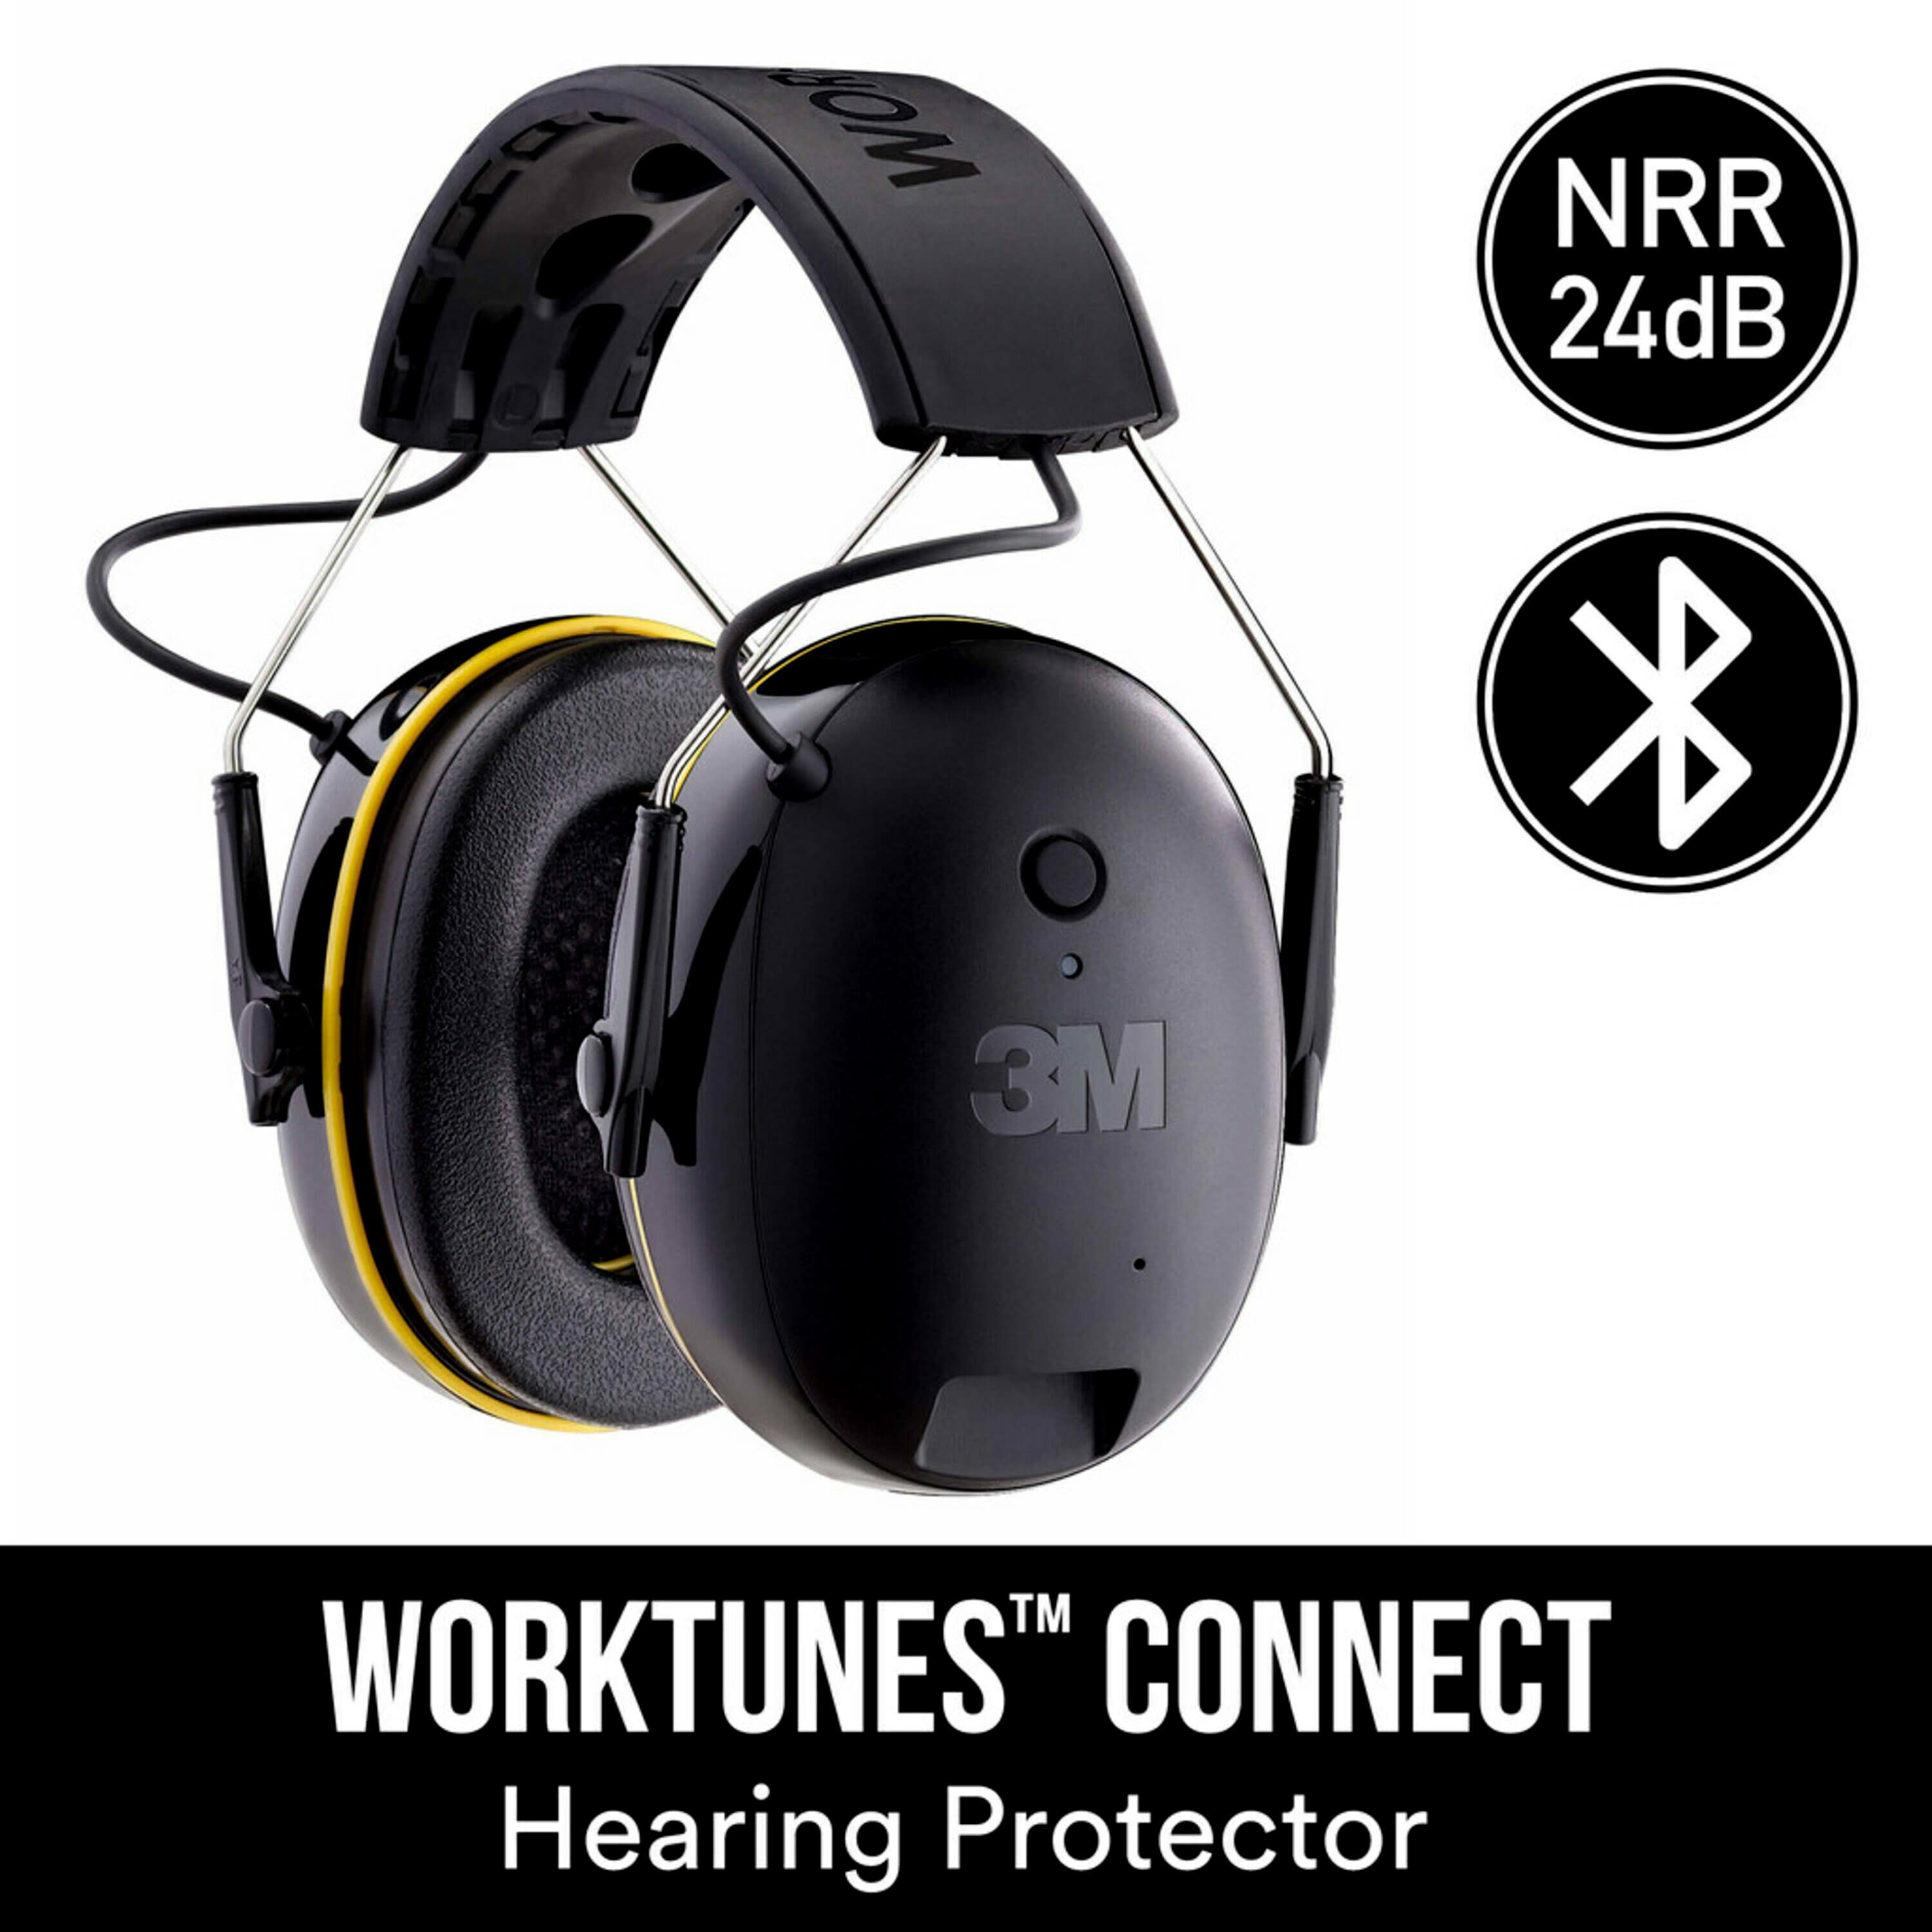 3M WorkTunes Connect Ear Protection with Bluetooth, Rechargeable Battery,  Audio and Voice Assist, Ear Muffs